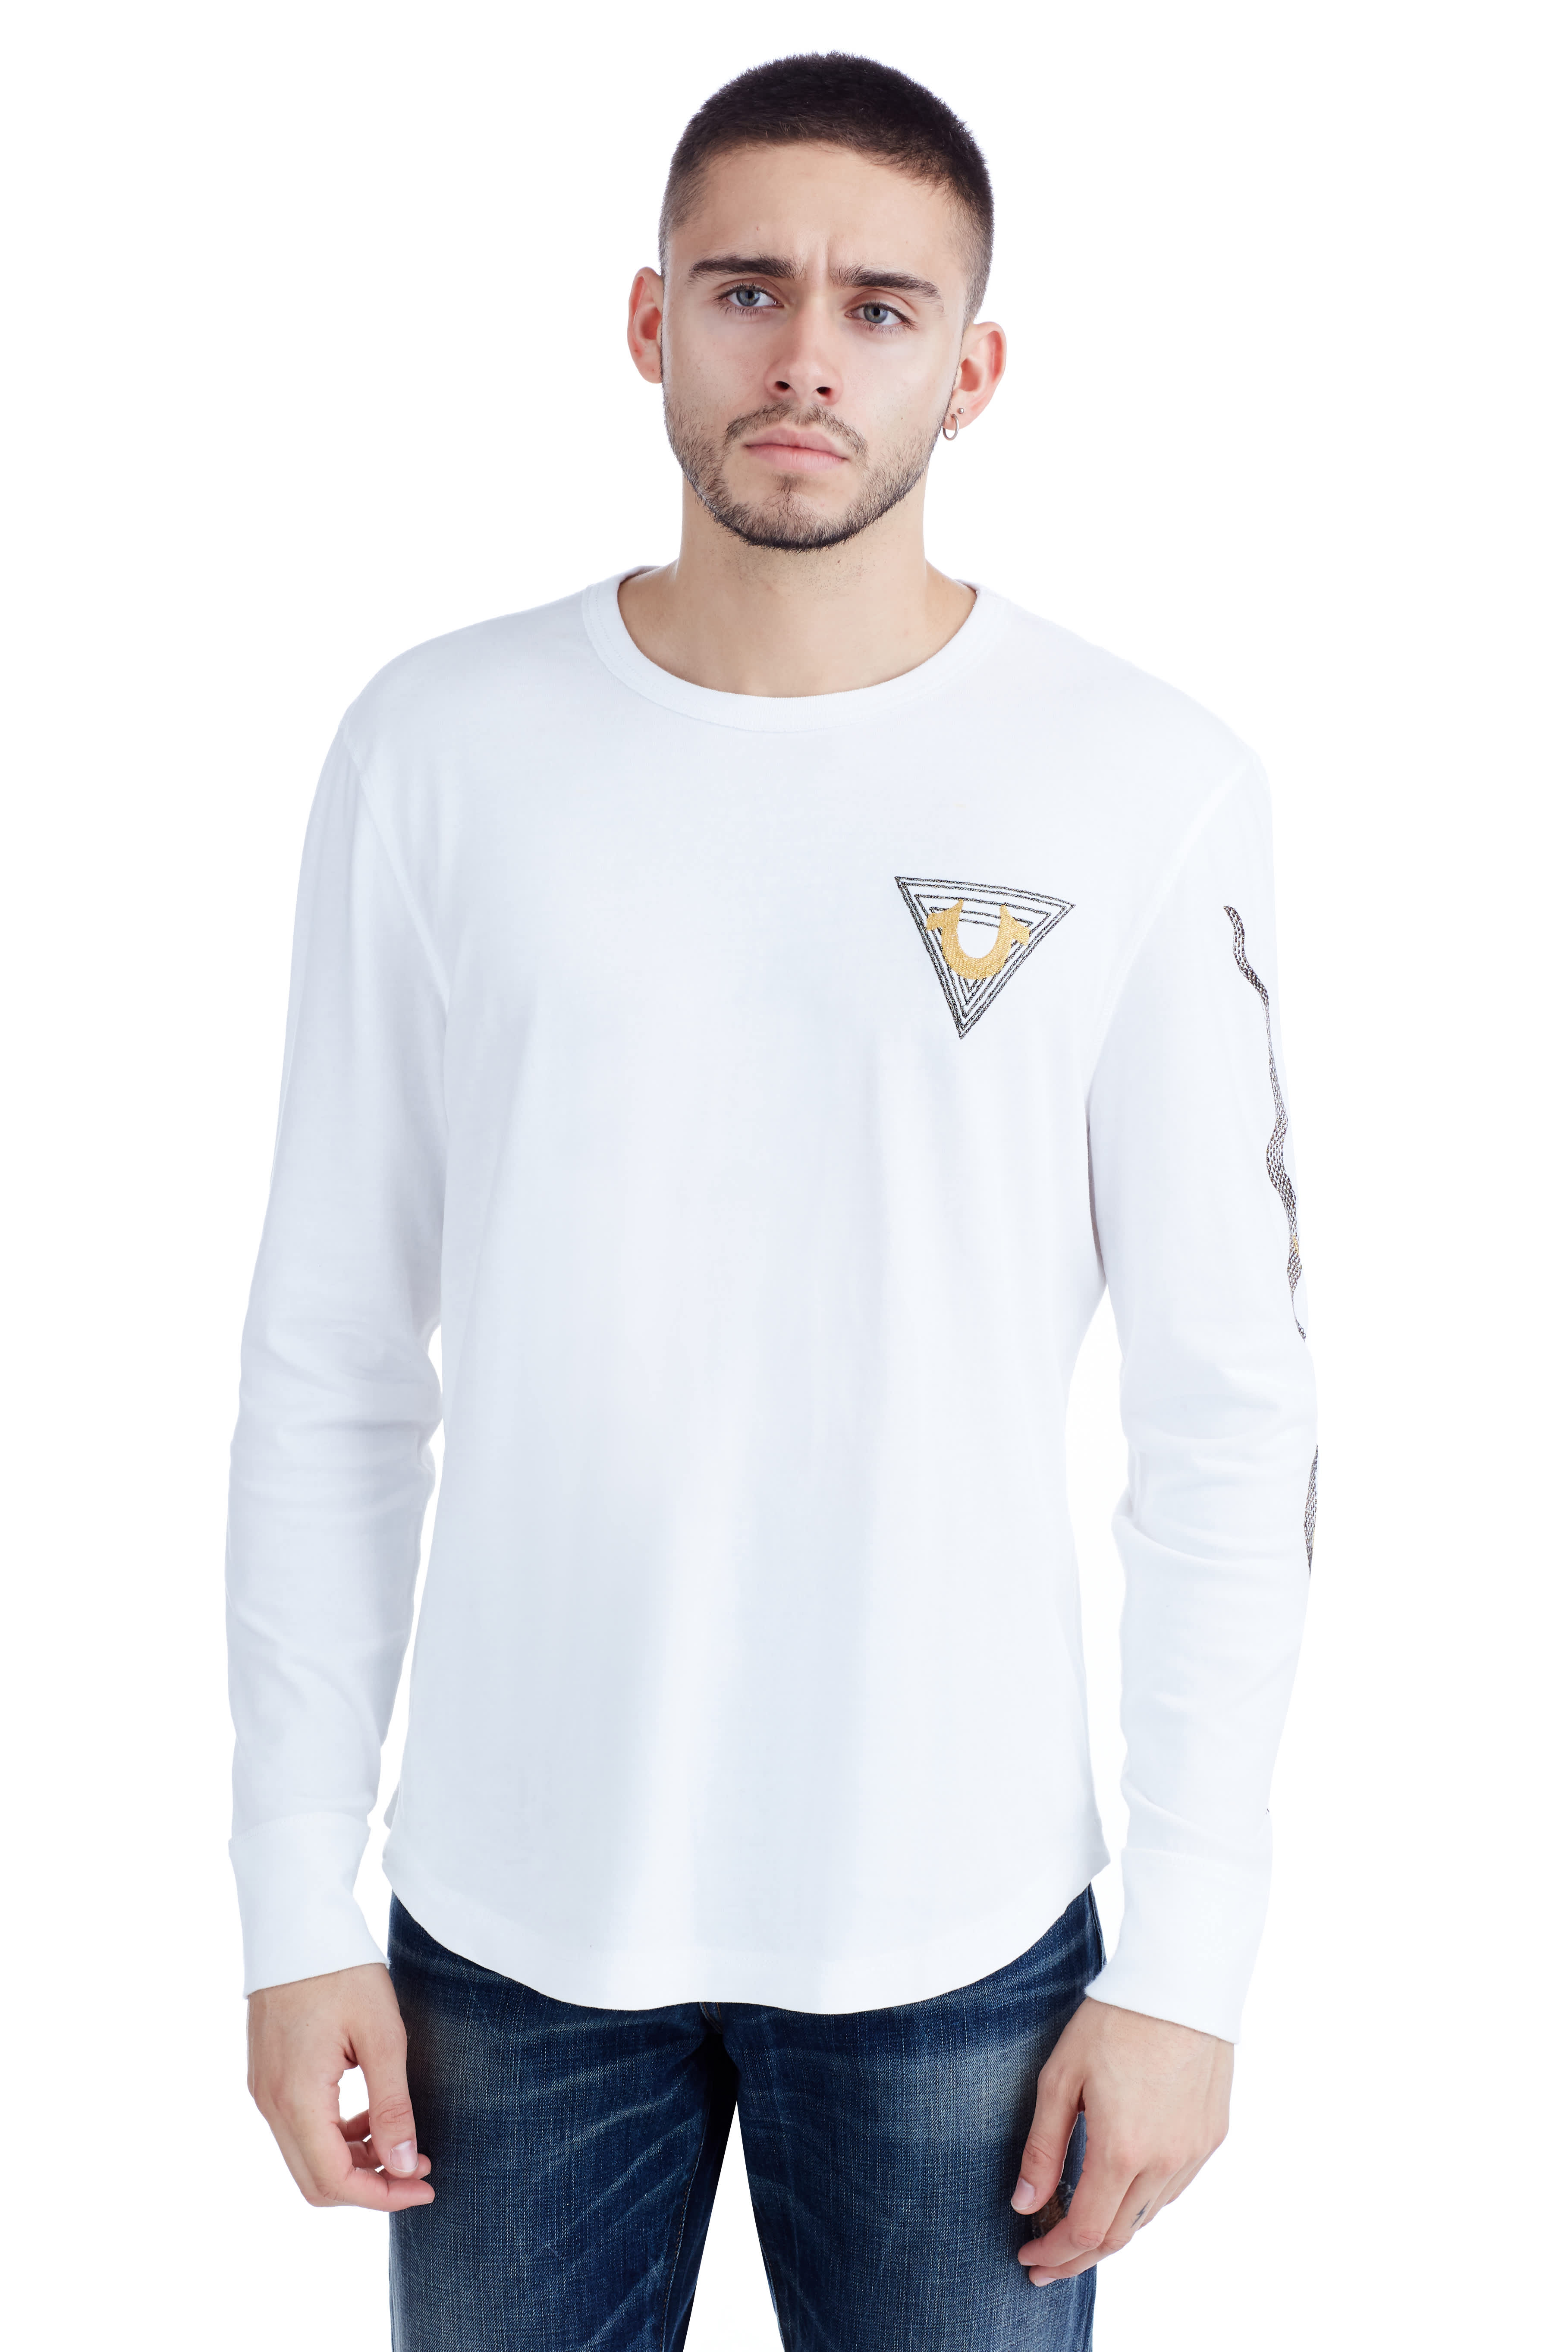 EMBROIDERED LINEAR ART CREW NECK MENS TEE